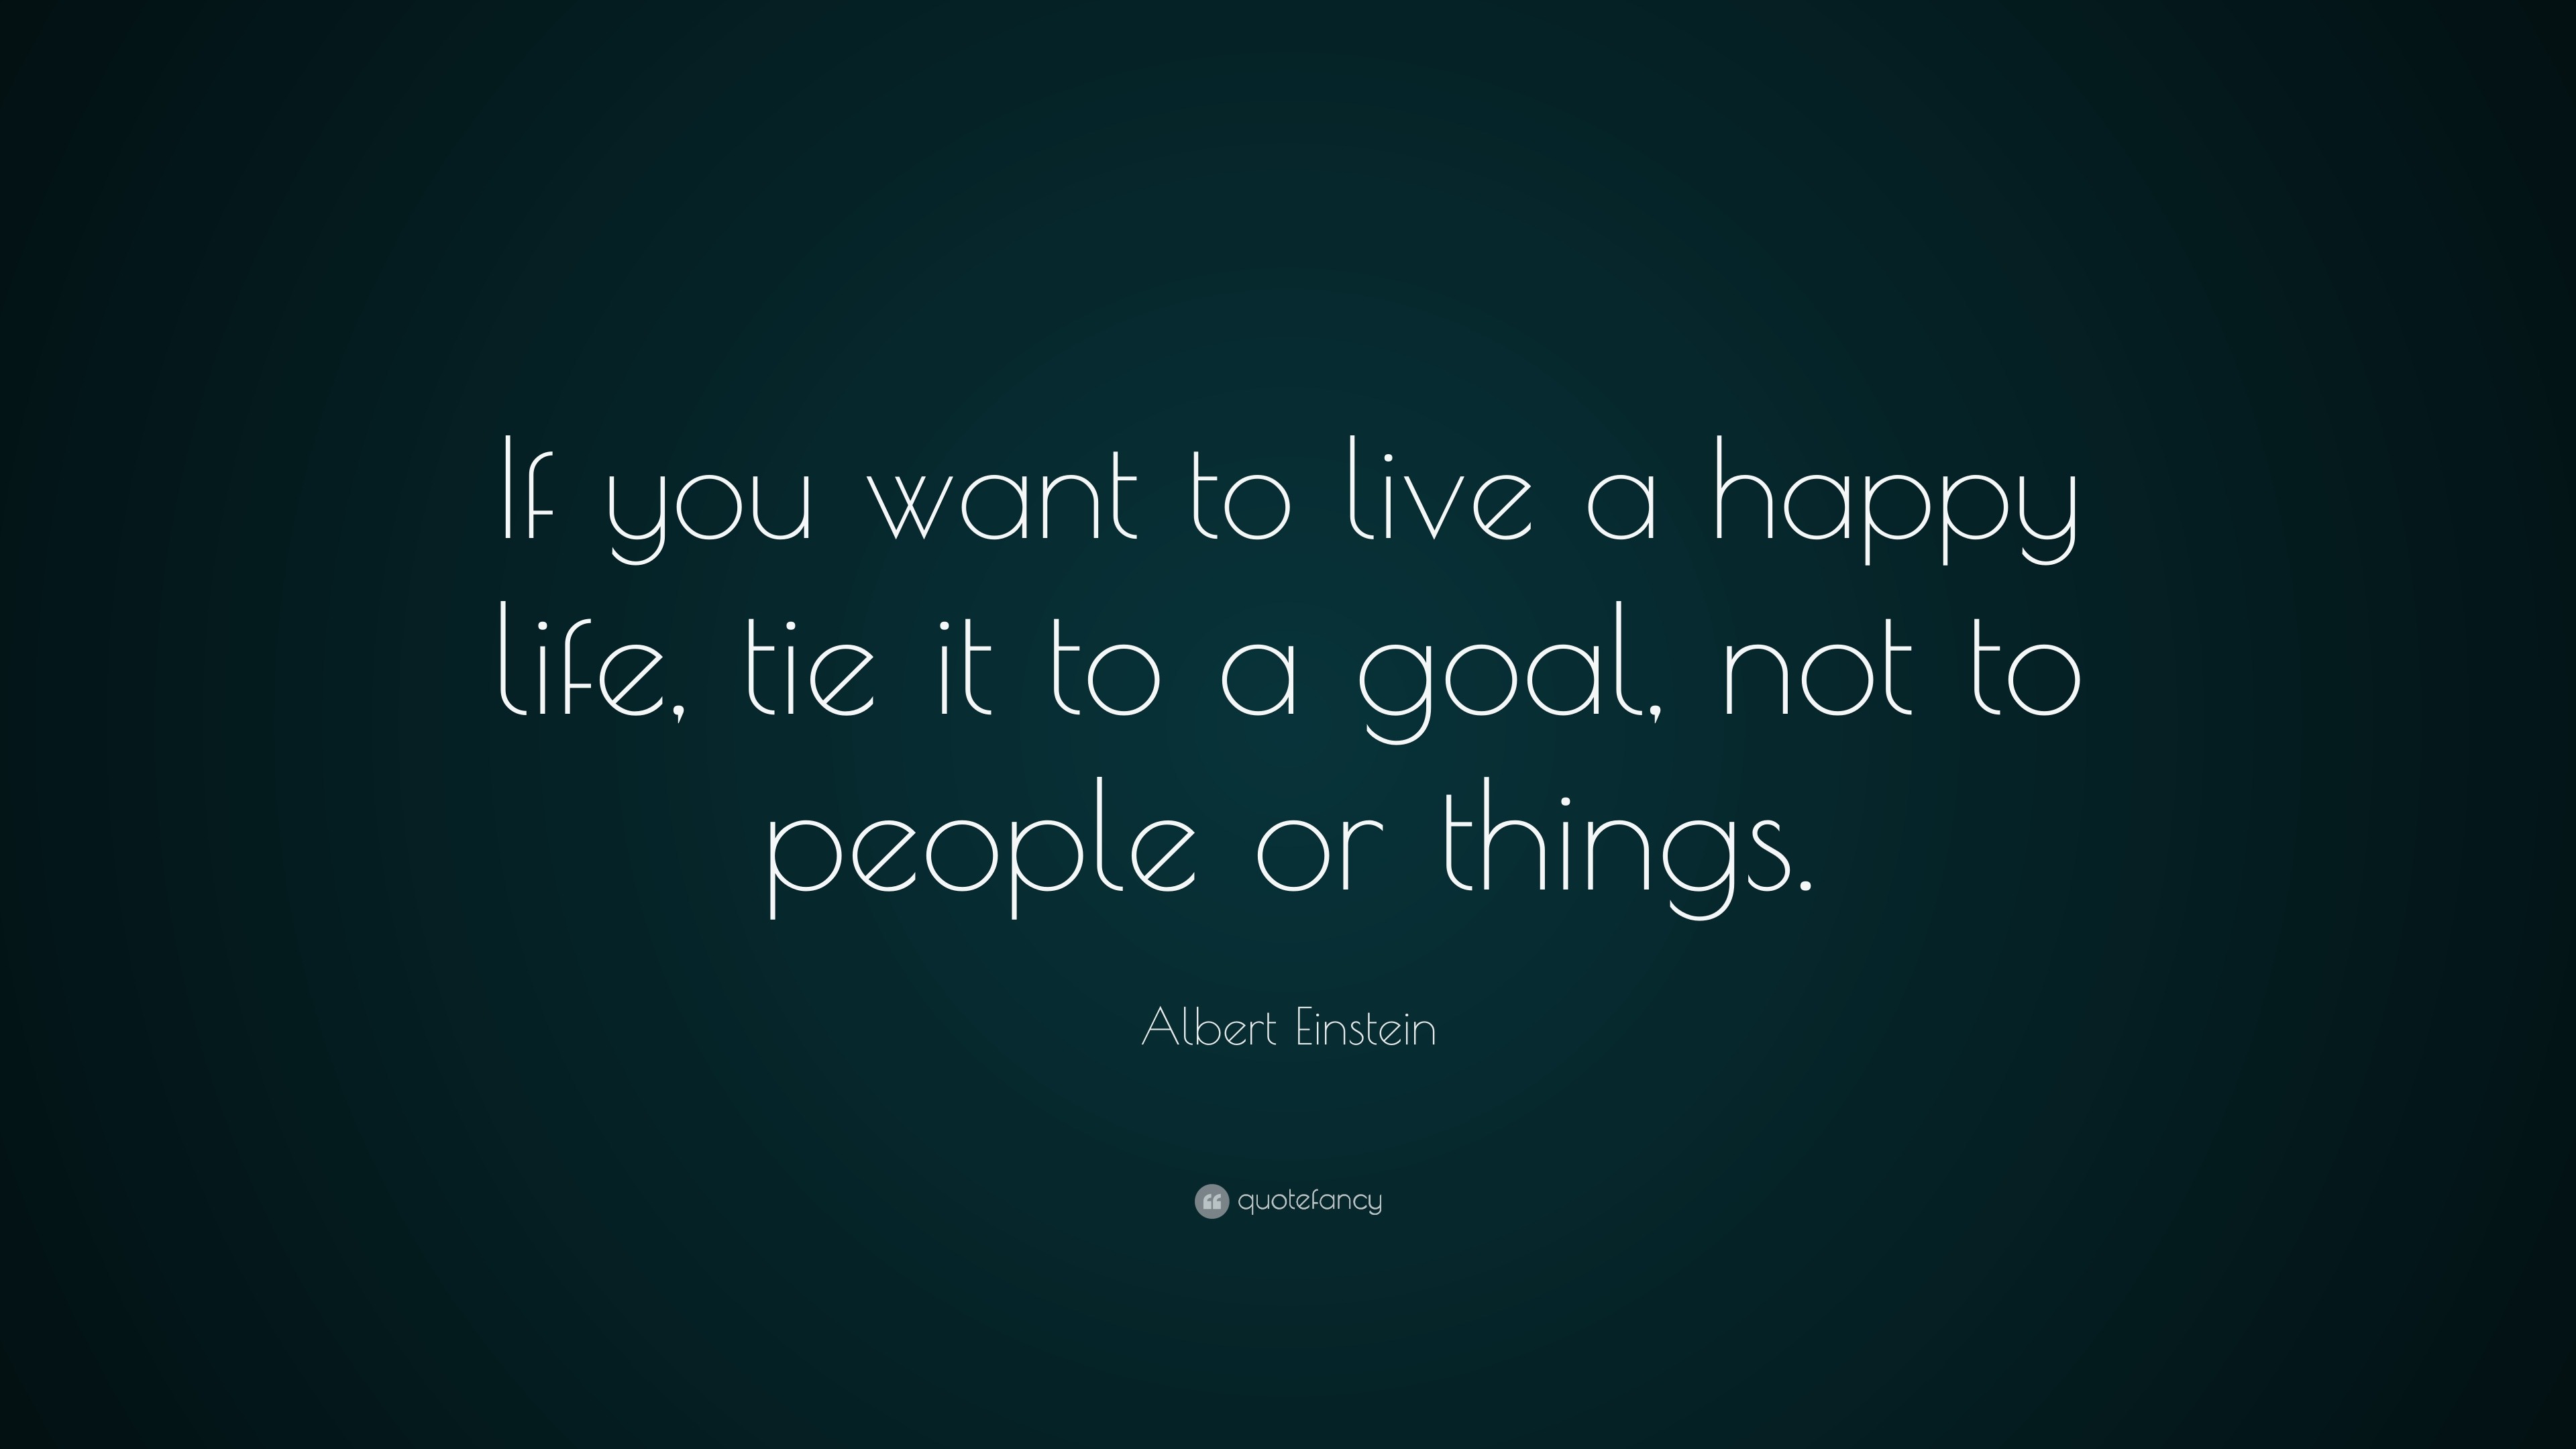 Albert Einstein Quote “If you want to live a happy life tie it